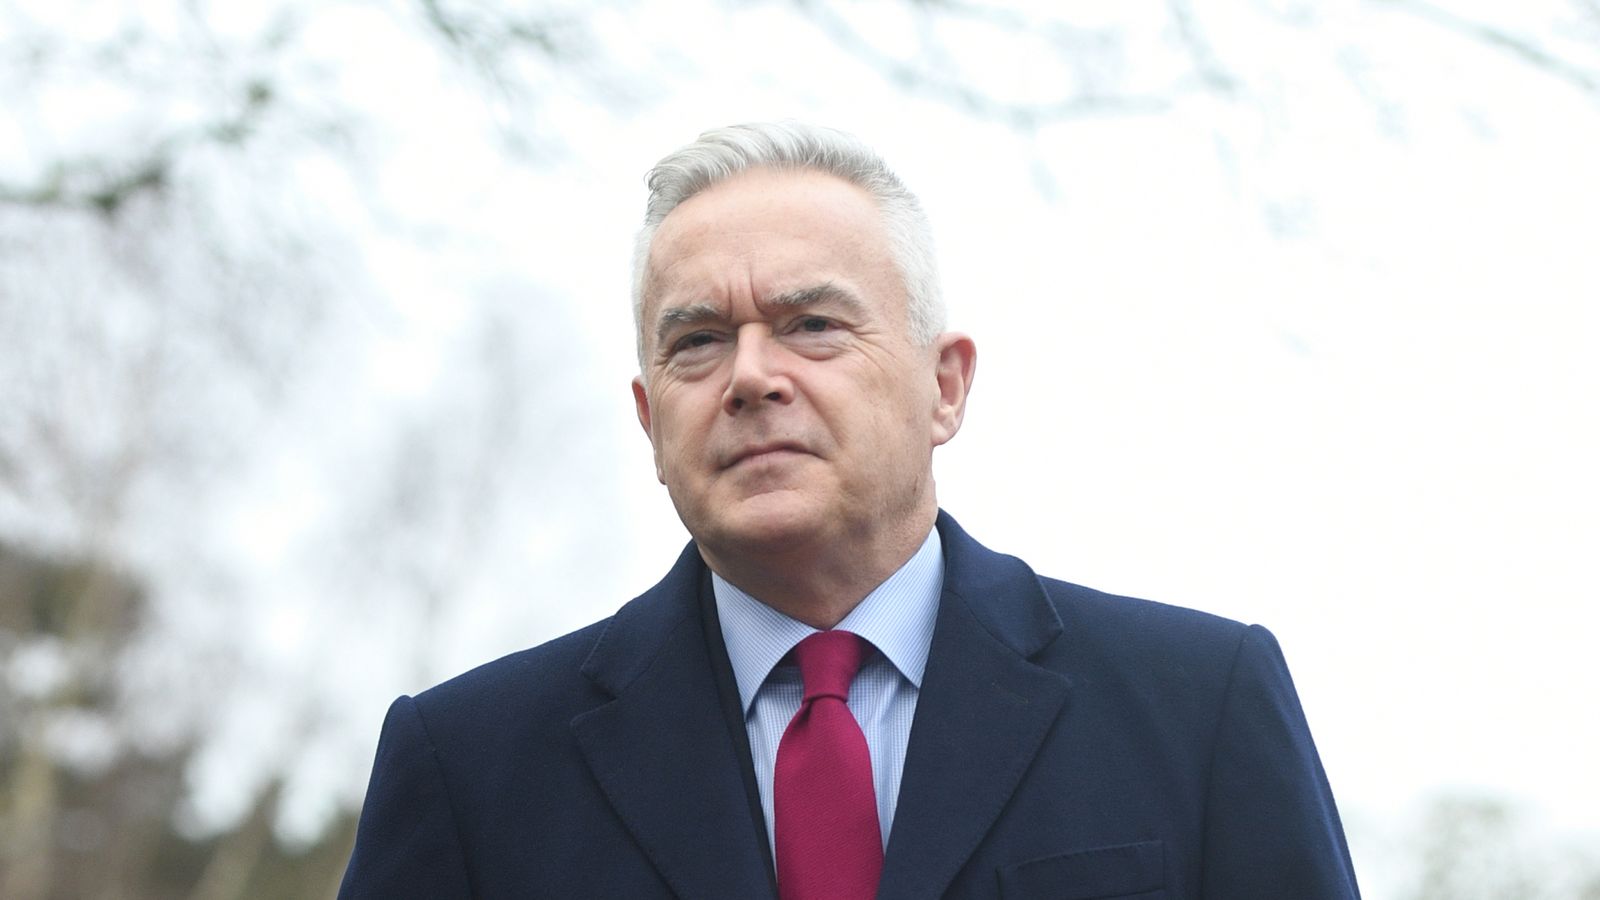 Huw Edwards resigns from BBC, corporation says